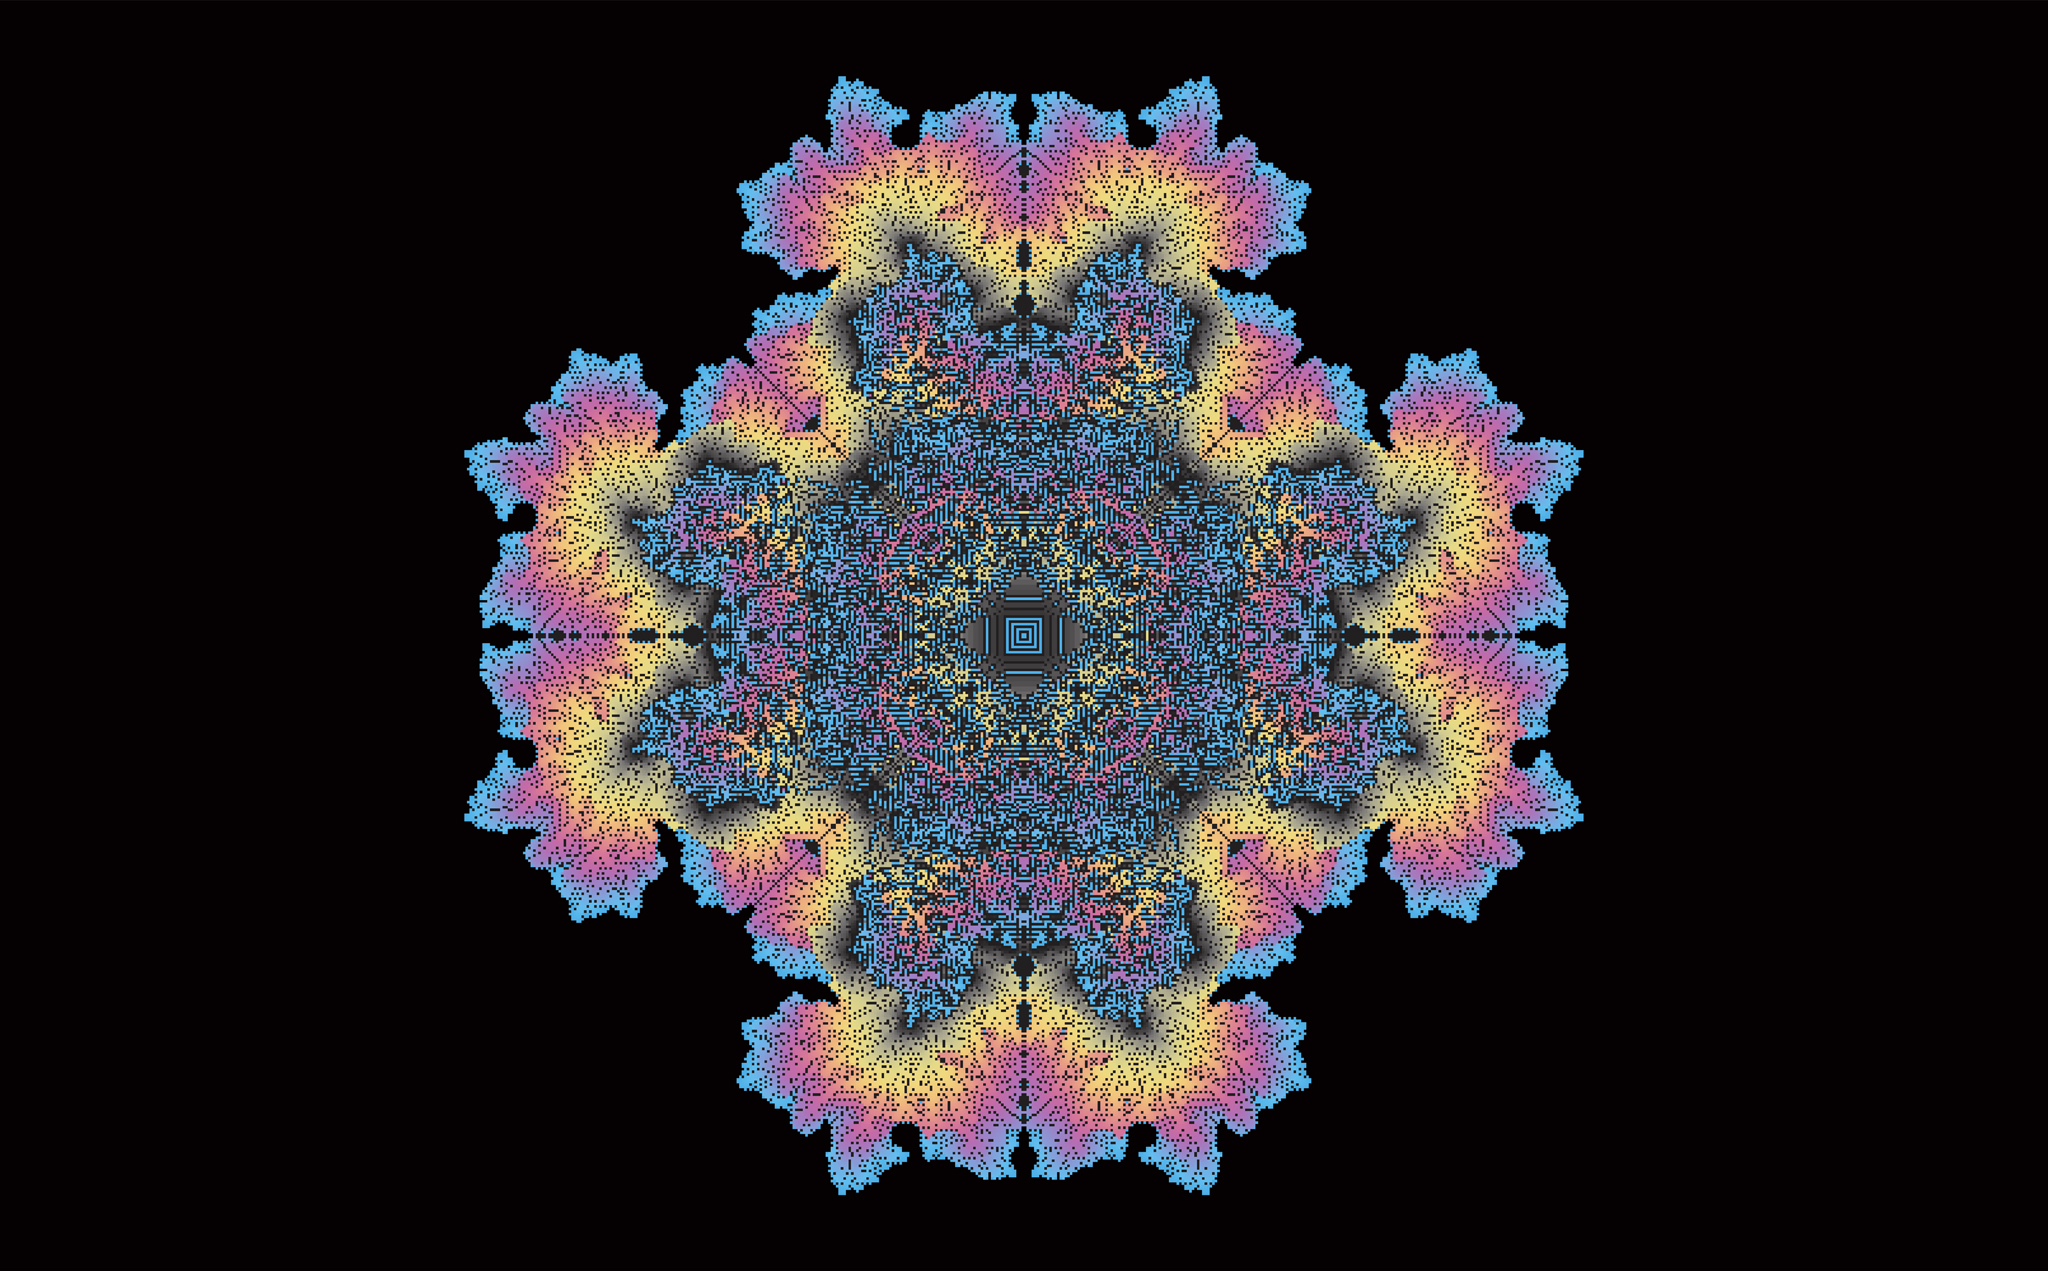 An image generated by simulating a modified version of a mathematical process called Conway's Game of Life.